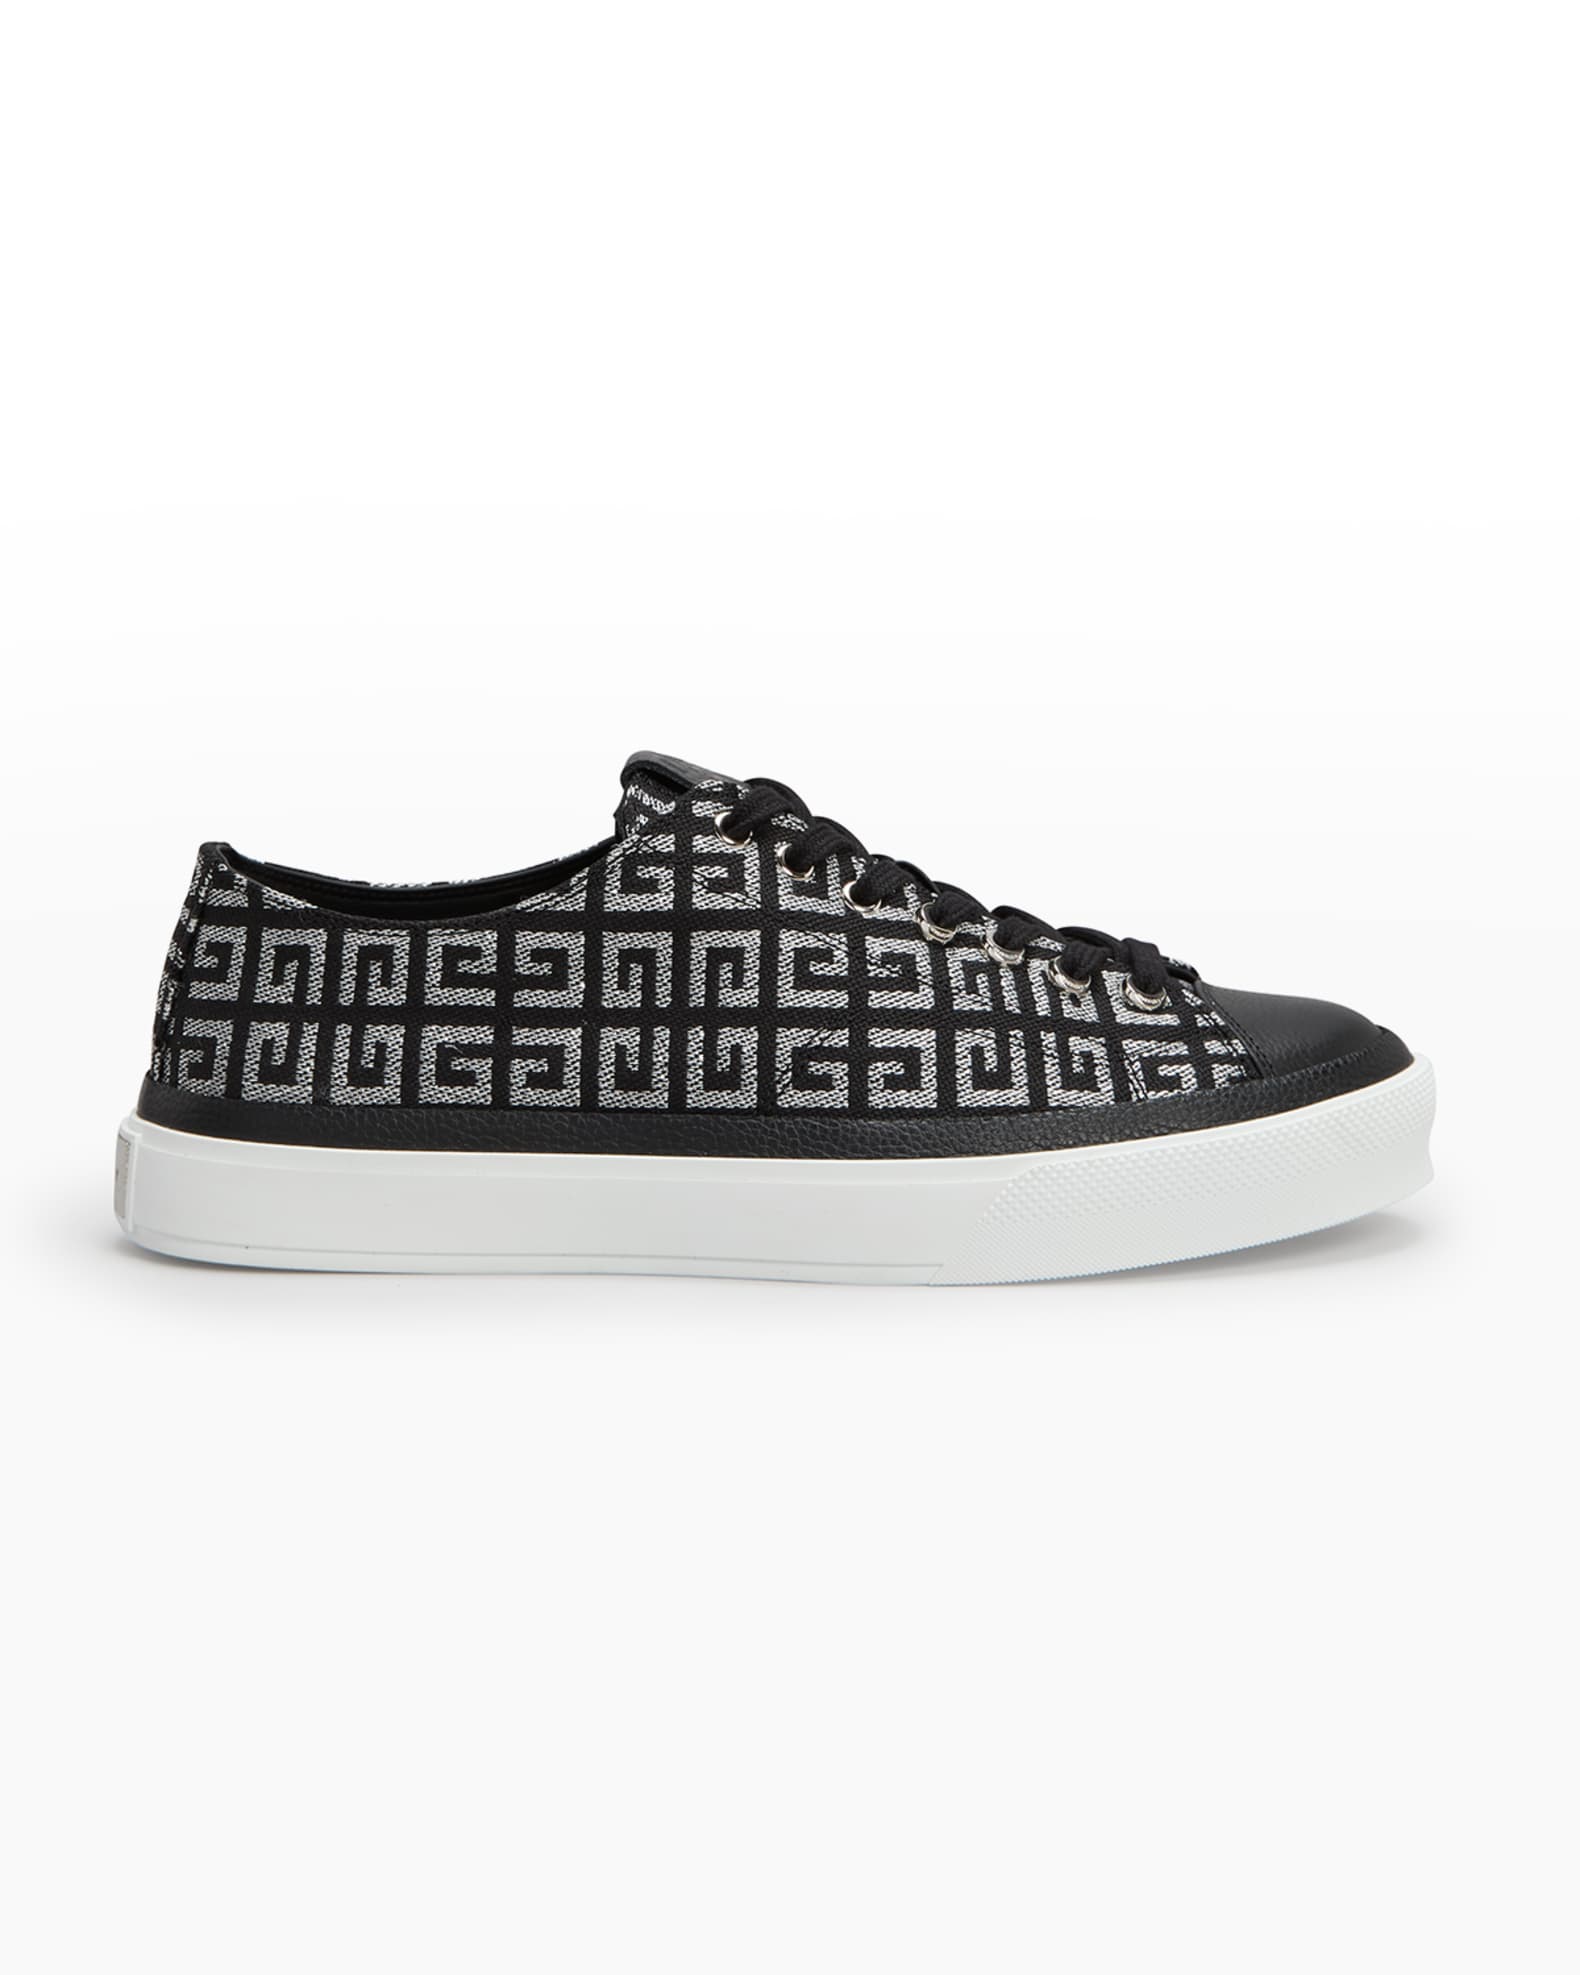 Givenchy Men's City Low-Top 4G-Jacquard Sneakers | Neiman Marcus